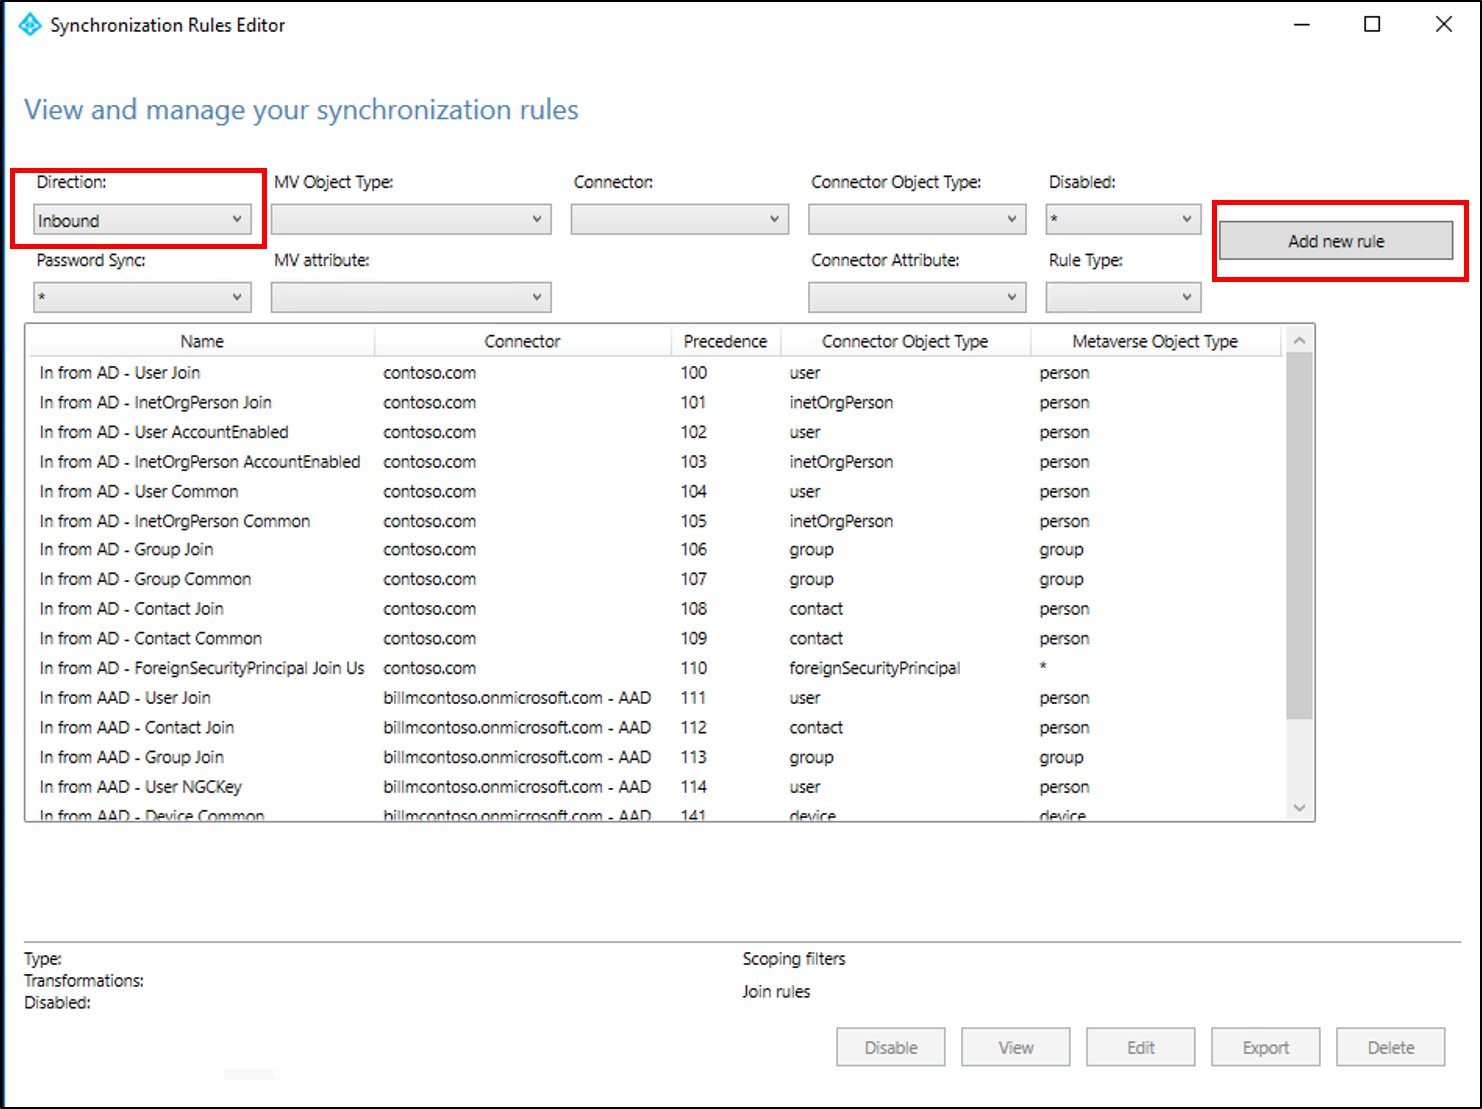 Screenshot that shows the "View and manage your synchronization rules" window with "Inbound" and the "Add new rule" button selected.